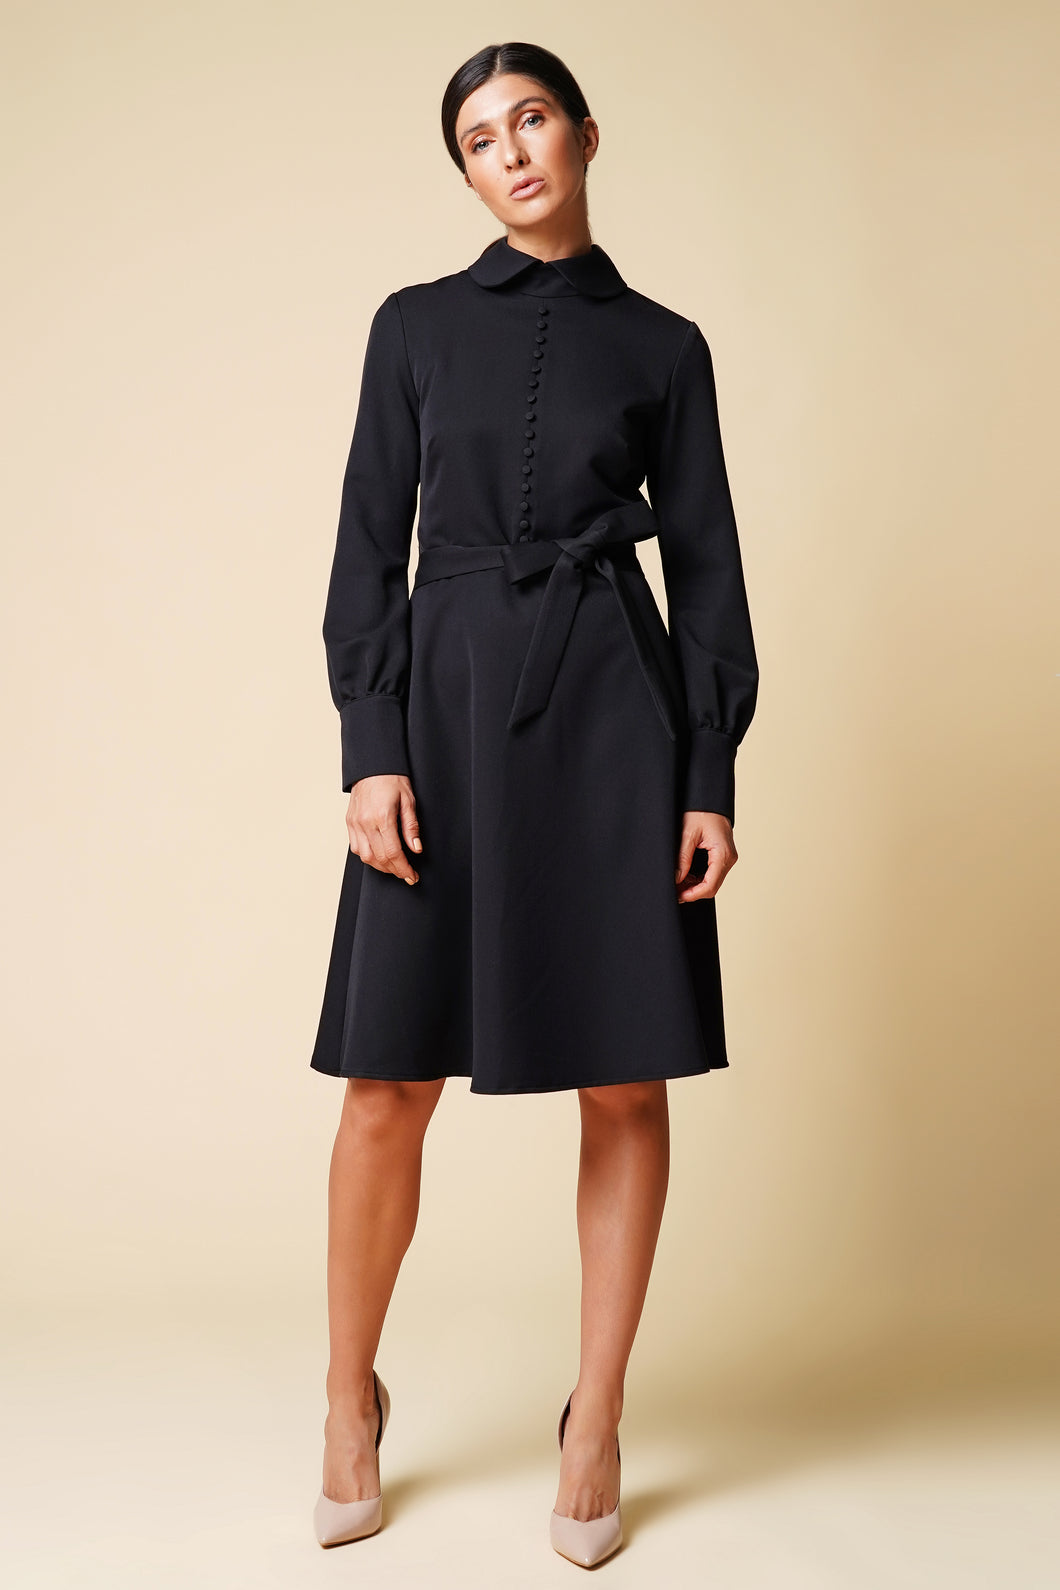 Collared button front black dress